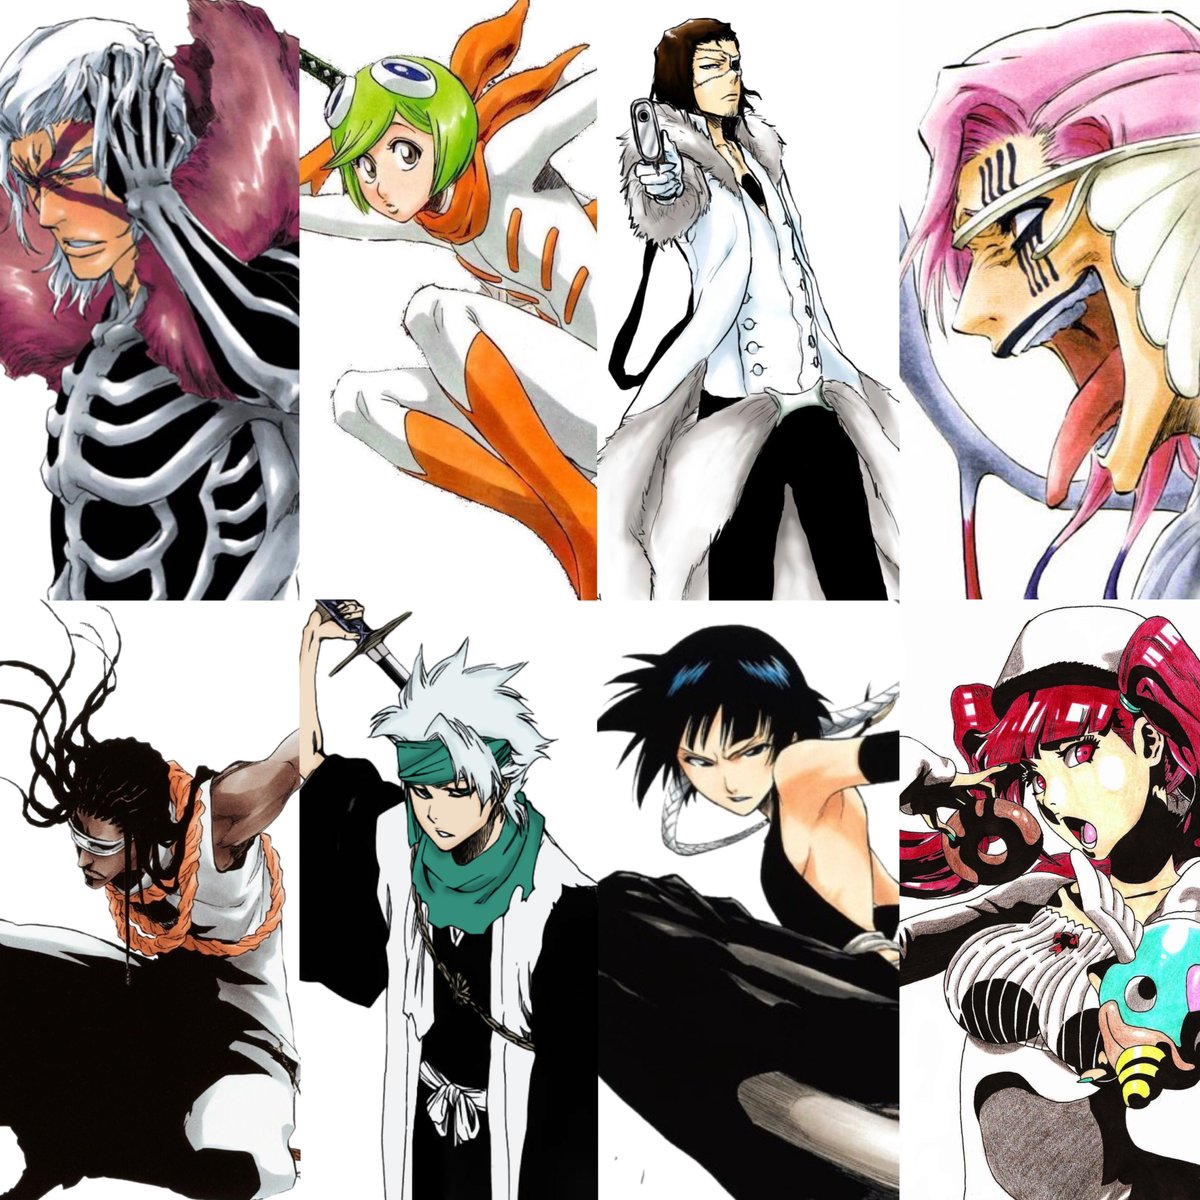 Kubo has never missed when it comes to character designs